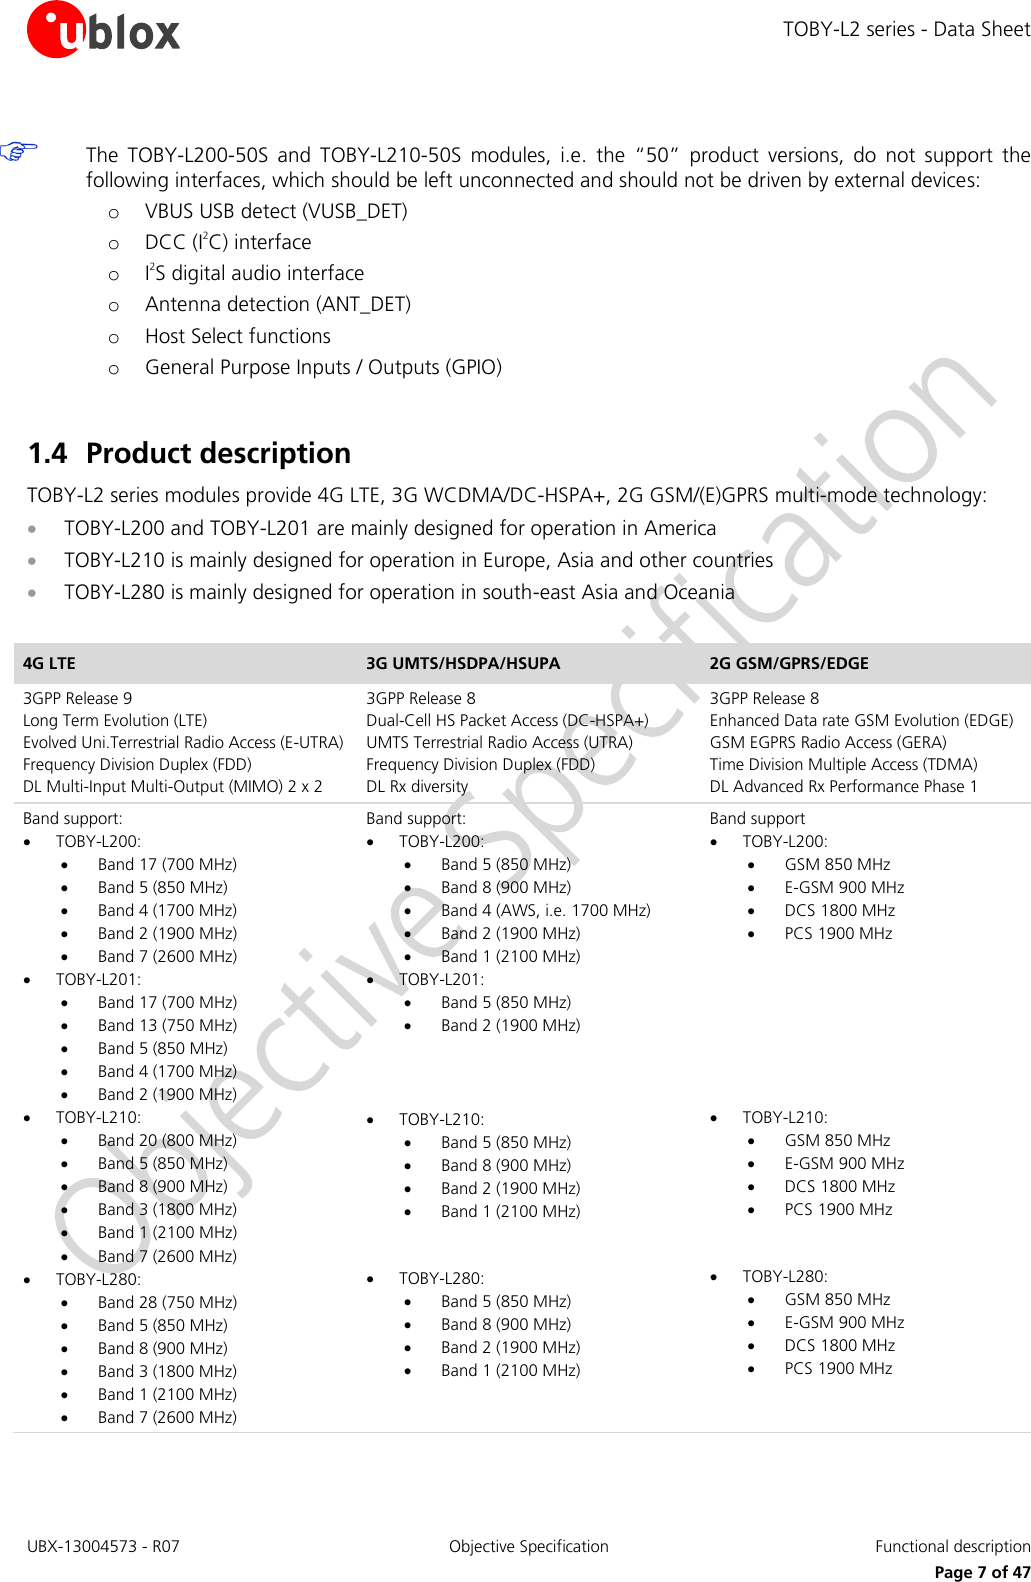 TOBY-L2 series - Data Sheet UBX-13004573 - R07  Objective Specification  Functional description   Page 7 of 47  The  TOBY-L200-50S  and  TOBY-L210-50S  modules,  i.e.  the  “50”  product  versions,  do  not  support  the following interfaces, which should be left unconnected and should not be driven by external devices: o VBUS USB detect (VUSB_DET)  o DCC (I2C) interface  o I2S digital audio interface  o Antenna detection (ANT_DET)  o Host Select functions  o General Purpose Inputs / Outputs (GPIO)  1.4 Product description TOBY-L2 series modules provide 4G LTE, 3G WCDMA/DC-HSPA+, 2G GSM/(E)GPRS multi-mode technology:  TOBY-L200 and TOBY-L201 are mainly designed for operation in America  TOBY-L210 is mainly designed for operation in Europe, Asia and other countries  TOBY-L280 is mainly designed for operation in south-east Asia and Oceania  4G LTE 3G UMTS/HSDPA/HSUPA 2G GSM/GPRS/EDGE 3GPP Release 9 Long Term Evolution (LTE) Evolved Uni.Terrestrial Radio Access (E-UTRA) Frequency Division Duplex (FDD) DL Multi-Input Multi-Output (MIMO) 2 x 2  3GPP Release 8 Dual-Cell HS Packet Access (DC-HSPA+) UMTS Terrestrial Radio Access (UTRA)  Frequency Division Duplex (FDD) DL Rx diversity  3GPP Release 8 Enhanced Data rate GSM Evolution (EDGE) GSM EGPRS Radio Access (GERA) Time Division Multiple Access (TDMA) DL Advanced Rx Performance Phase 1 Band support:  TOBY-L200:  Band 17 (700 MHz)  Band 5 (850 MHz)  Band 4 (1700 MHz)  Band 2 (1900 MHz)  Band 7 (2600 MHz)  TOBY-L201:  Band 17 (700 MHz)  Band 13 (750 MHz)  Band 5 (850 MHz)  Band 4 (1700 MHz)  Band 2 (1900 MHz)  TOBY-L210:  Band 20 (800 MHz)  Band 5 (850 MHz)  Band 8 (900 MHz)  Band 3 (1800 MHz)  Band 1 (2100 MHz)  Band 7 (2600 MHz)  TOBY-L280:  Band 28 (750 MHz)  Band 5 (850 MHz)  Band 8 (900 MHz)  Band 3 (1800 MHz)  Band 1 (2100 MHz)  Band 7 (2600 MHz) Band support:  TOBY-L200:  Band 5 (850 MHz)  Band 8 (900 MHz)  Band 4 (AWS, i.e. 1700 MHz)  Band 2 (1900 MHz)  Band 1 (2100 MHz)  TOBY-L201:  Band 5 (850 MHz)  Band 2 (1900 MHz)     TOBY-L210:  Band 5 (850 MHz)  Band 8 (900 MHz)  Band 2 (1900 MHz)  Band 1 (2100 MHz)    TOBY-L280:  Band 5 (850 MHz)  Band 8 (900 MHz)  Band 2 (1900 MHz)  Band 1 (2100 MHz) Band support  TOBY-L200:  GSM 850 MHz  E-GSM 900 MHz  DCS 1800 MHz  PCS 1900 MHz          TOBY-L210:  GSM 850 MHz  E-GSM 900 MHz  DCS 1800 MHz  PCS 1900 MHz     TOBY-L280:  GSM 850 MHz  E-GSM 900 MHz  DCS 1800 MHz  PCS 1900 MHz    